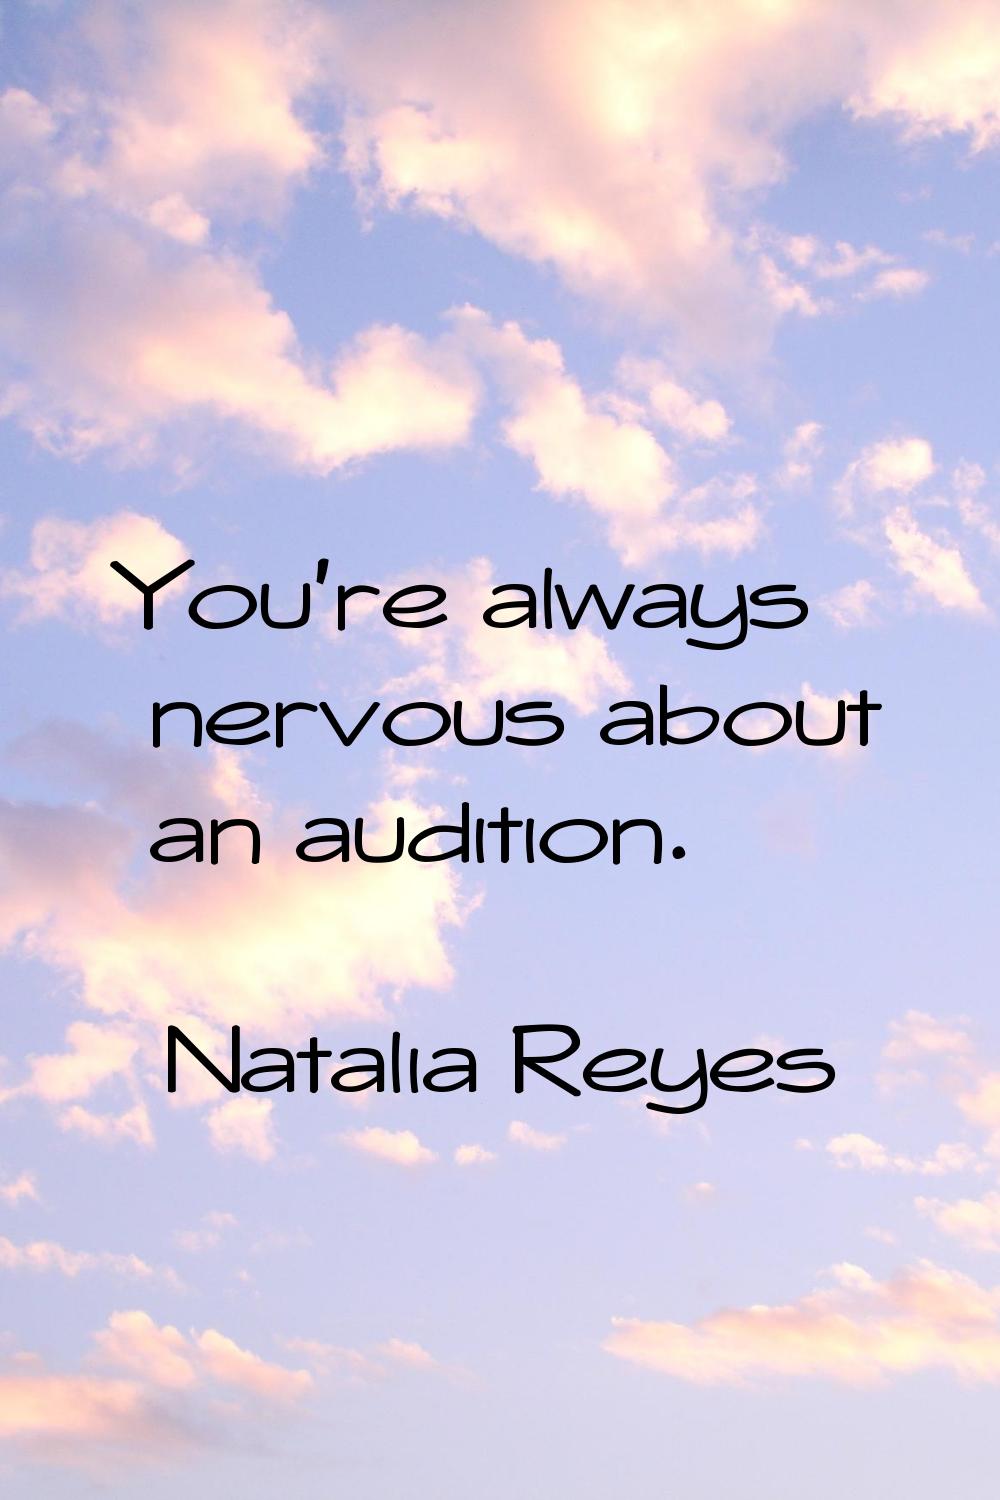 You’re always nervous about an audition.